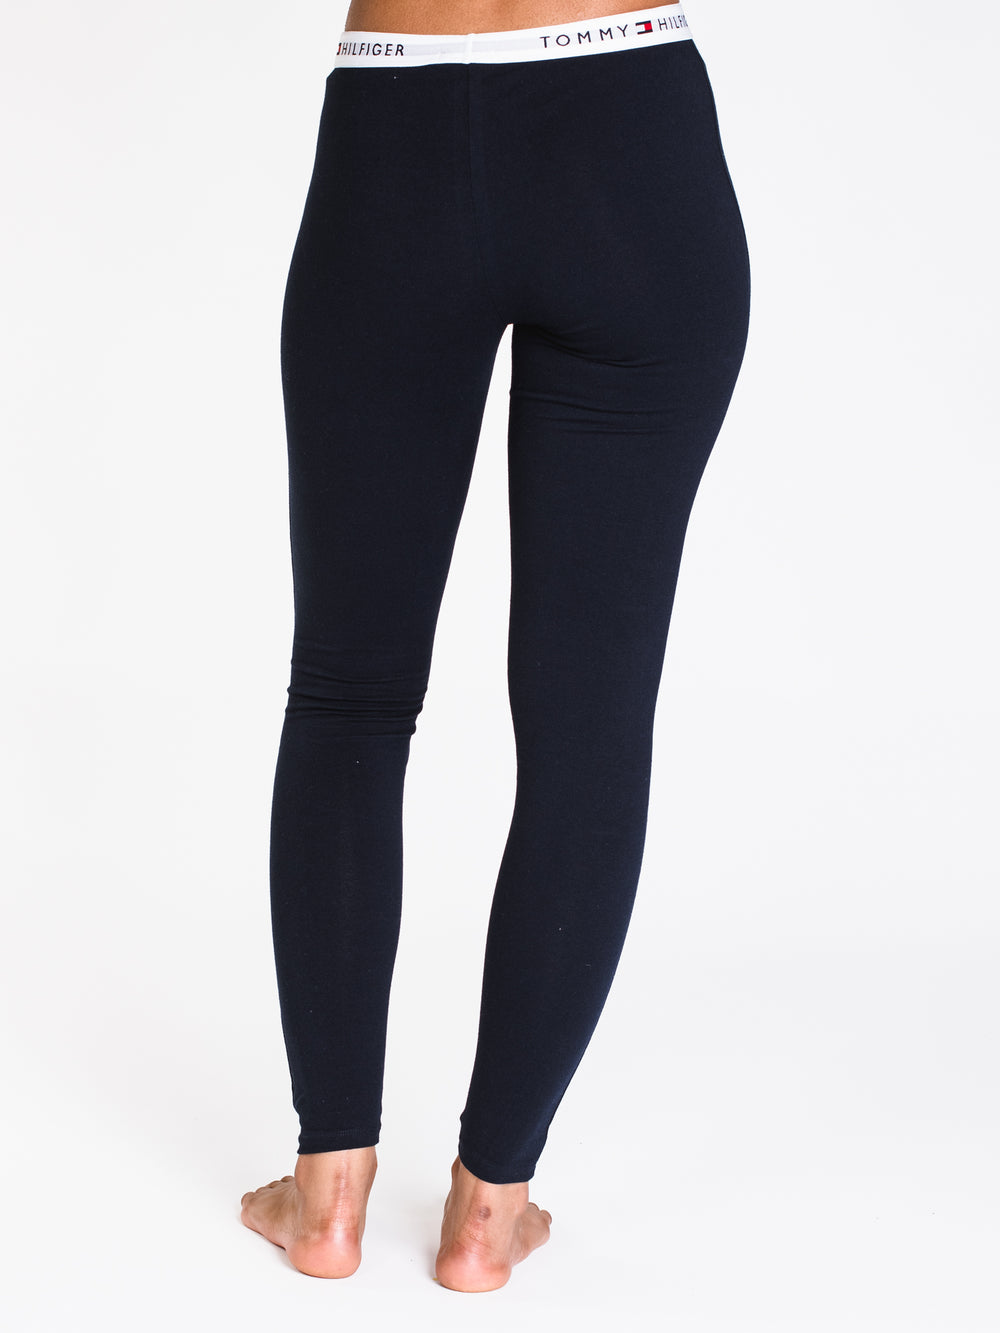 WOMENS TOMMY LEGGING - NAVY - CLEARANCE